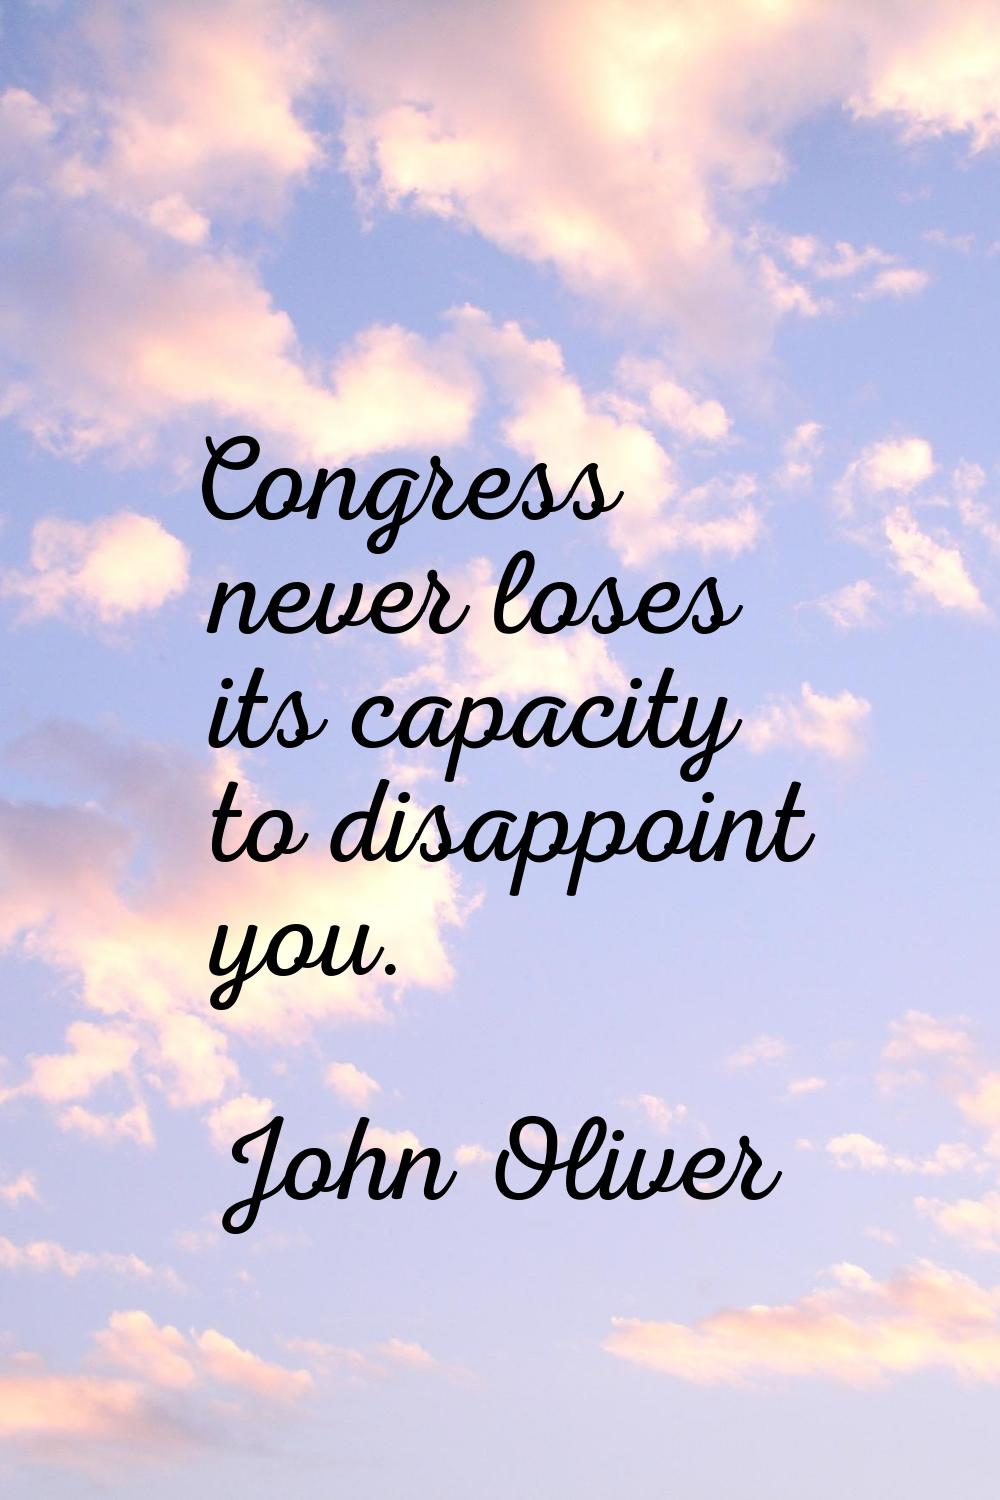 Congress never loses its capacity to disappoint you.